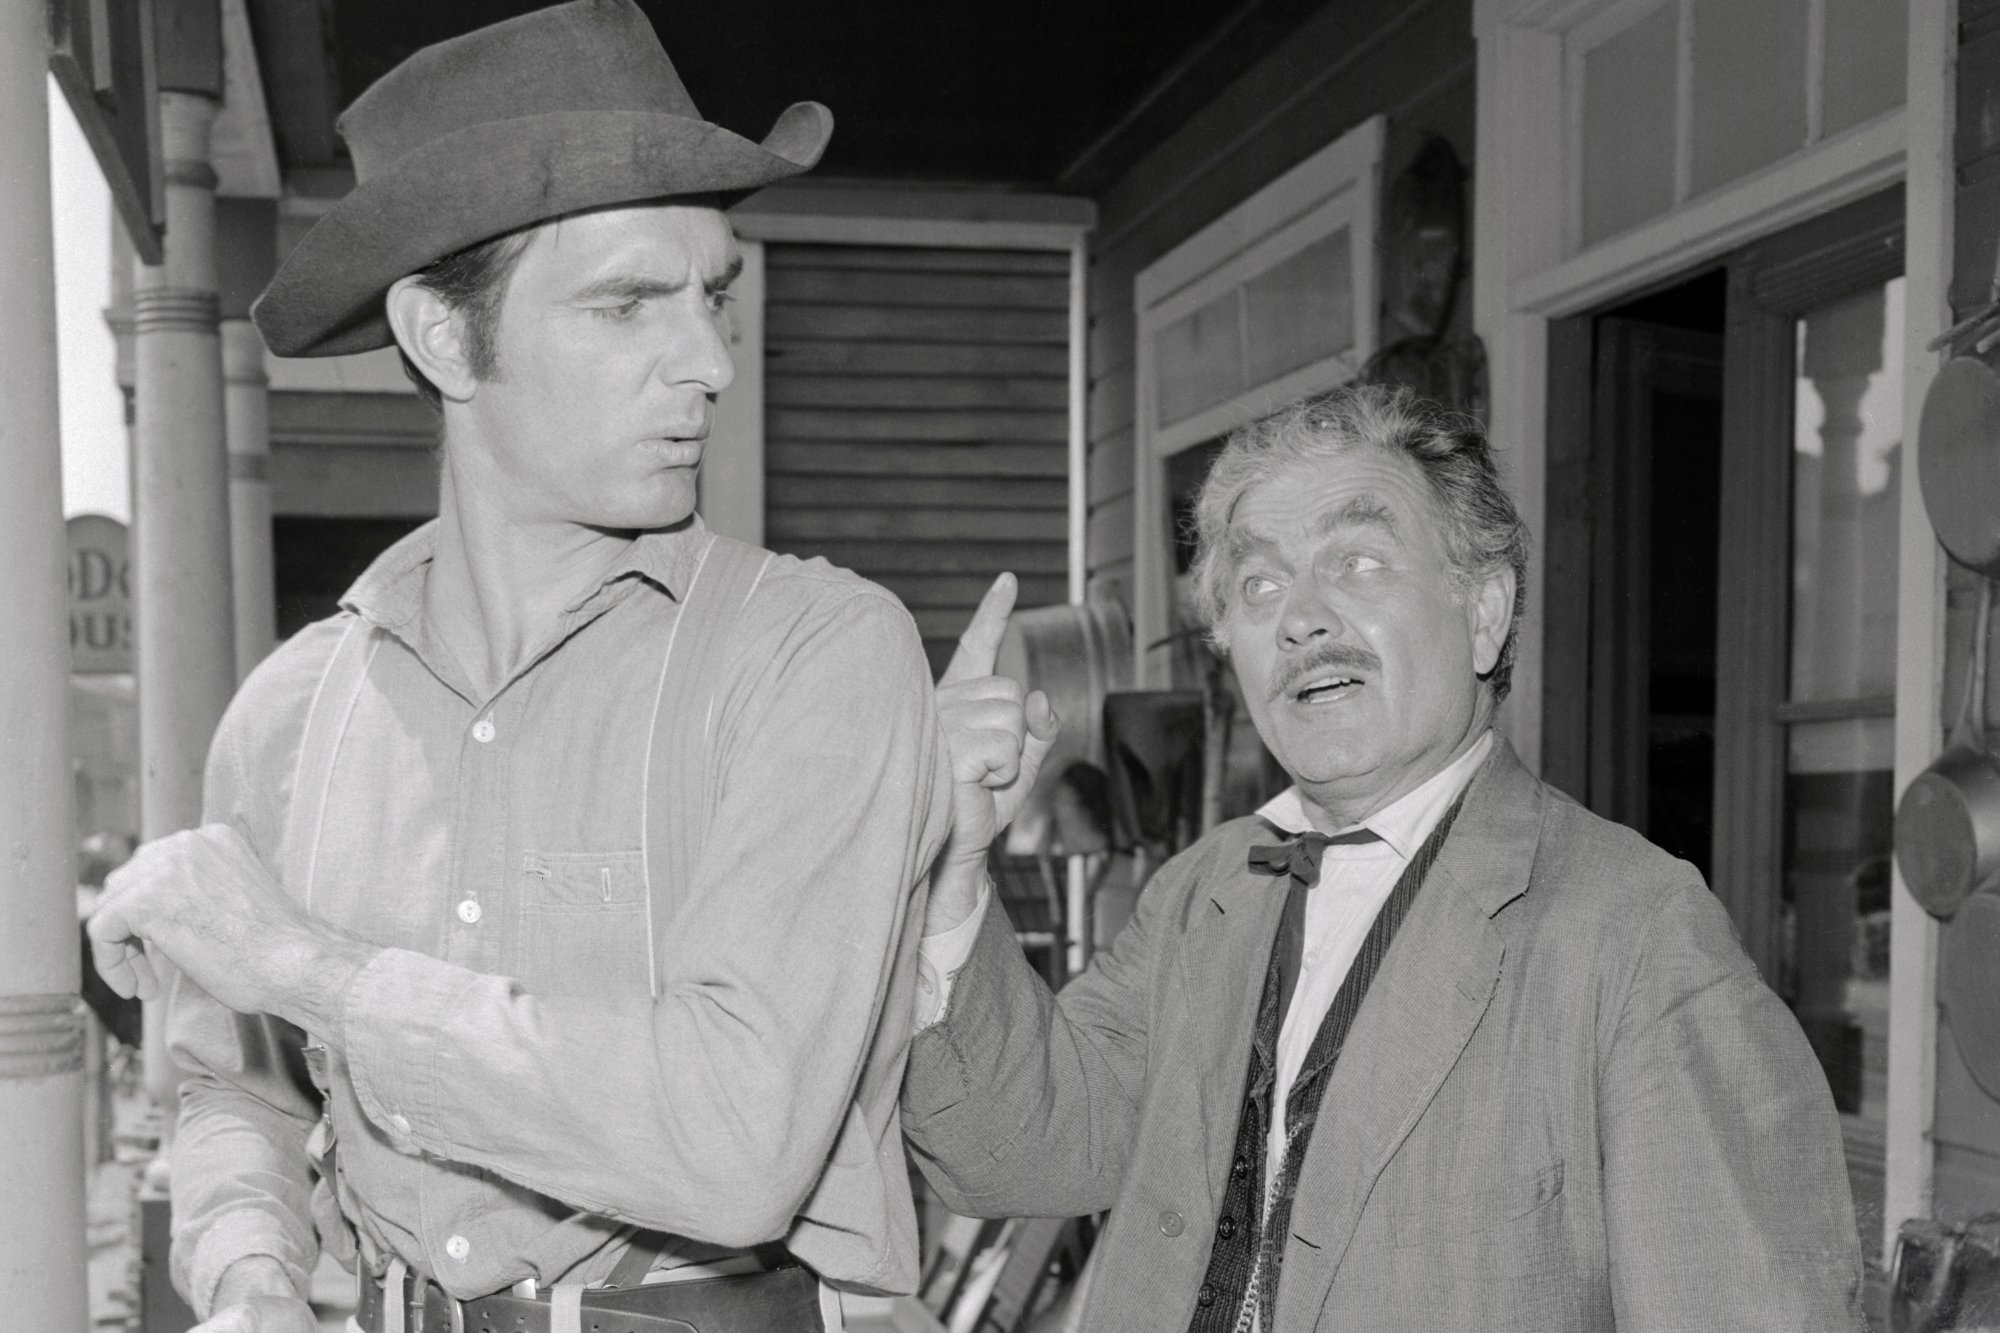 'Gunsmoke' Dennis Weaver as Chester Goode and Milburn Stone as Doc Adams. Stone is holding up his finger at Weaver, who is holding his arm away from him.